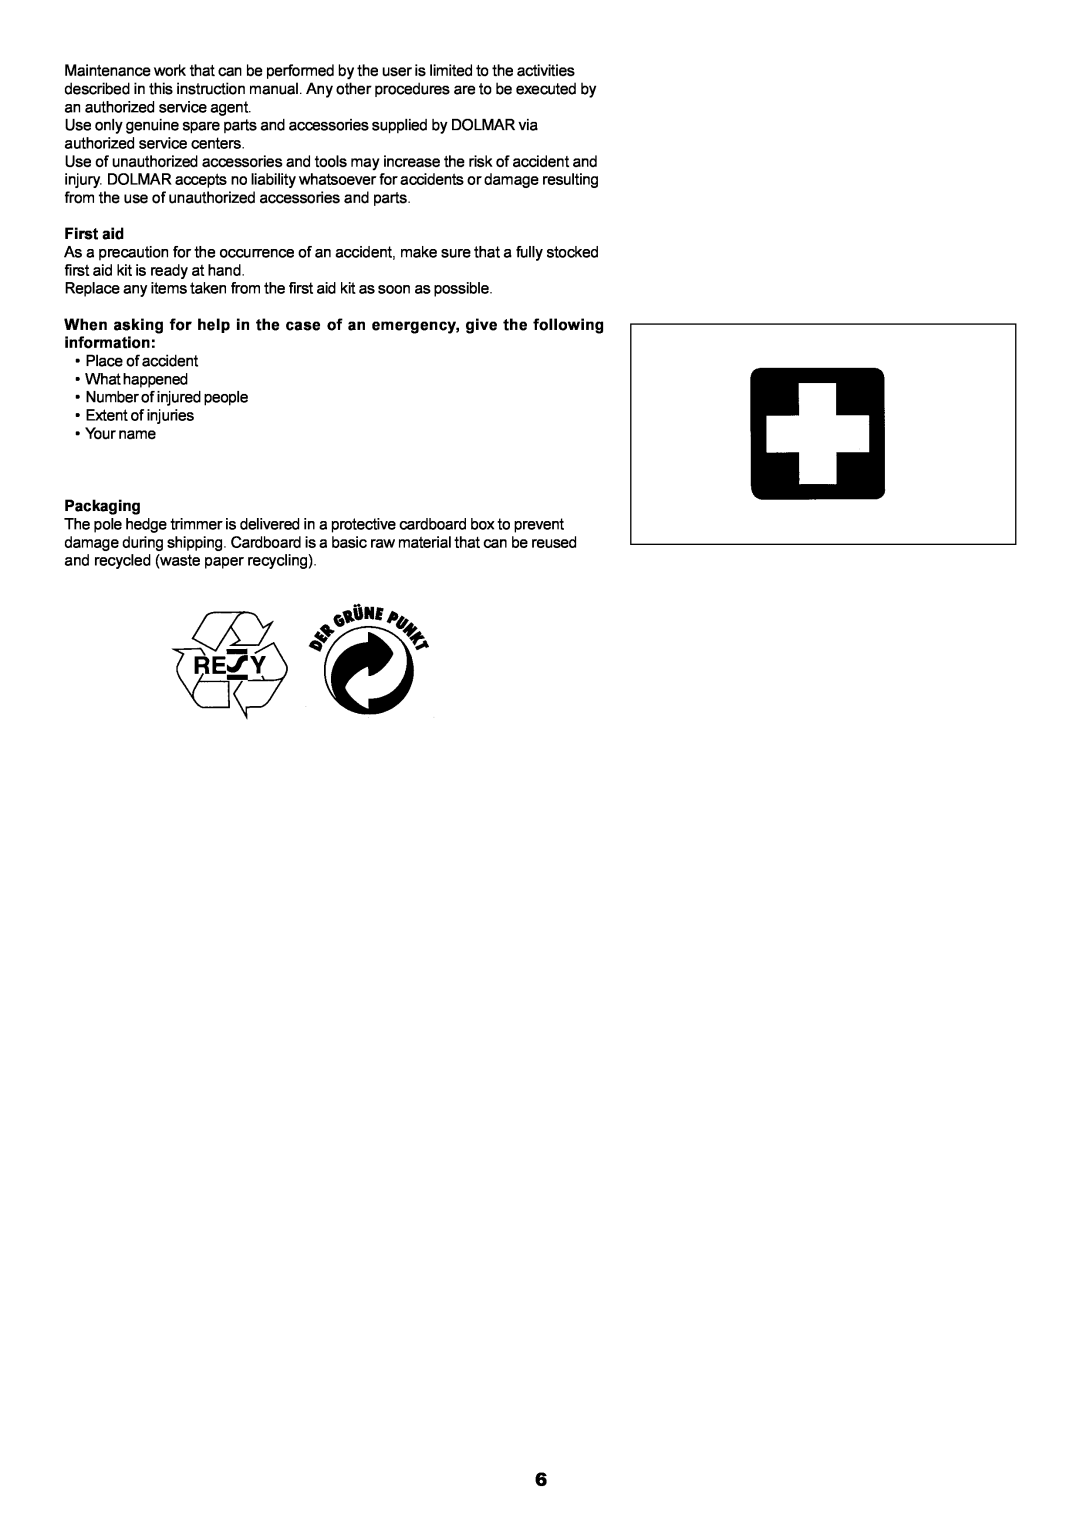 Dolmar MH-2556 instruction manual First aid, Replace any items taken from the first aid kit as soon as possible 